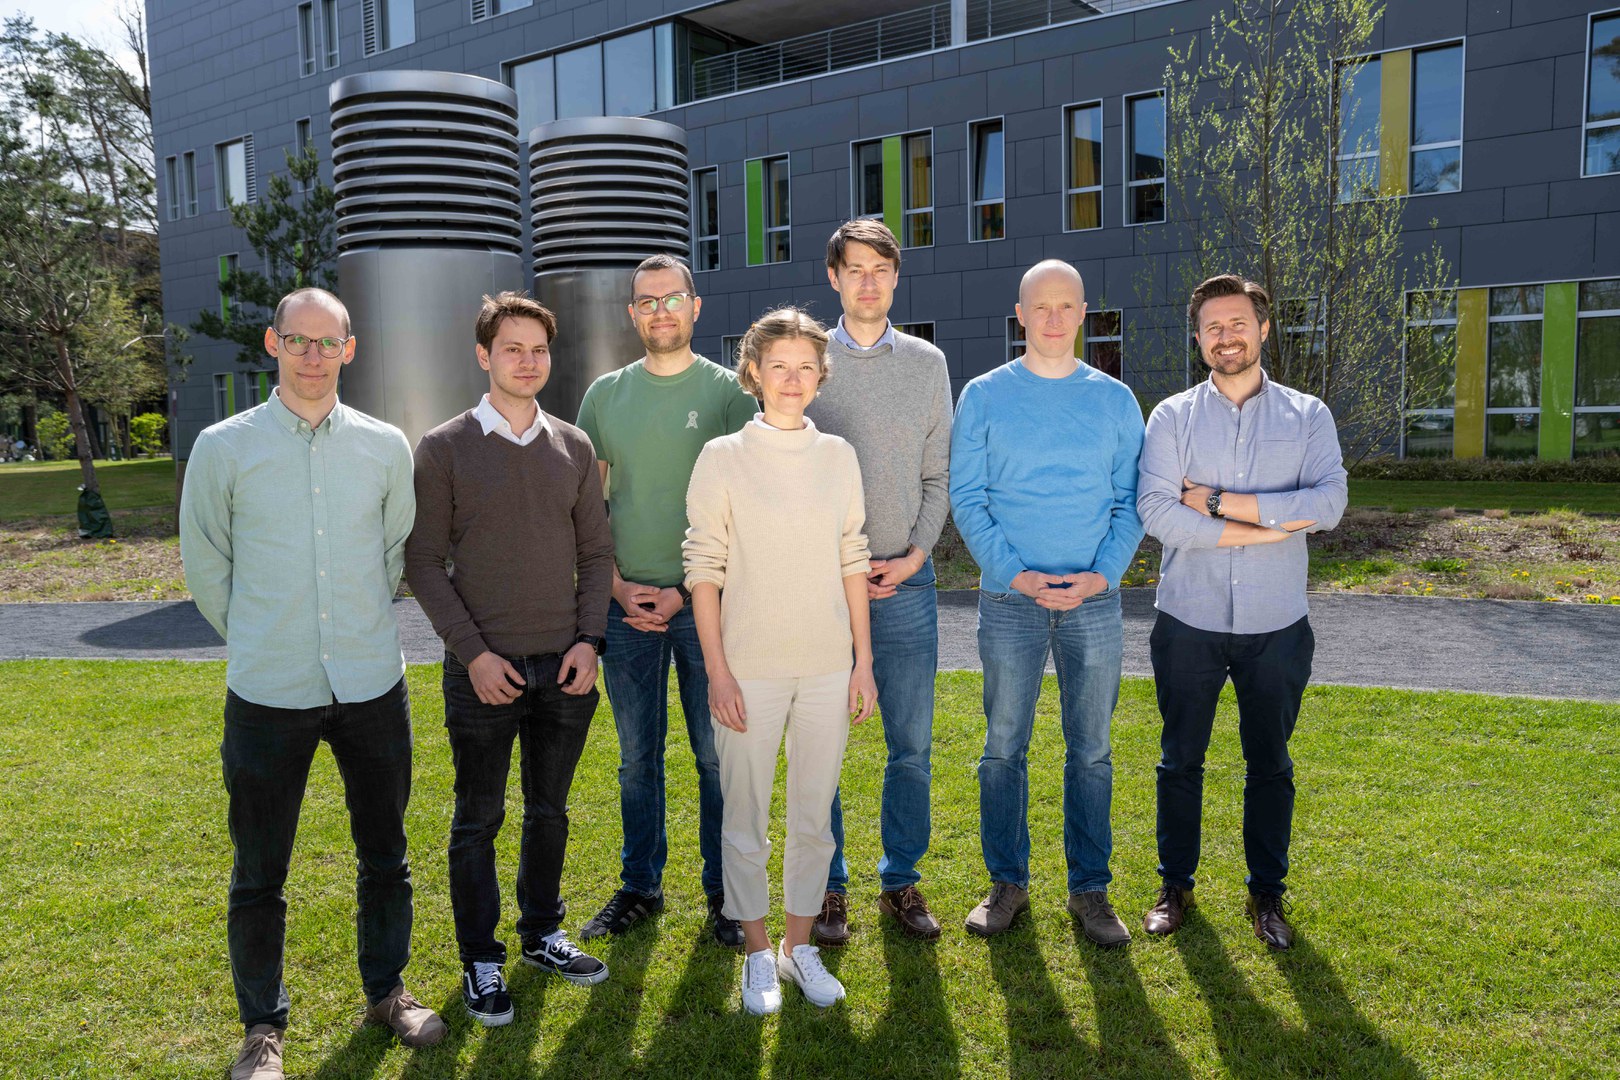 The relios.vision GmbH team: Dr. Katerina Deike-Hofmann (4th from left), Prof. Alexander Radbruch (3rd from right) and Prof. Alexander Effland (2nd from right) and other team members dedicated to lowering the use of contrast agents.